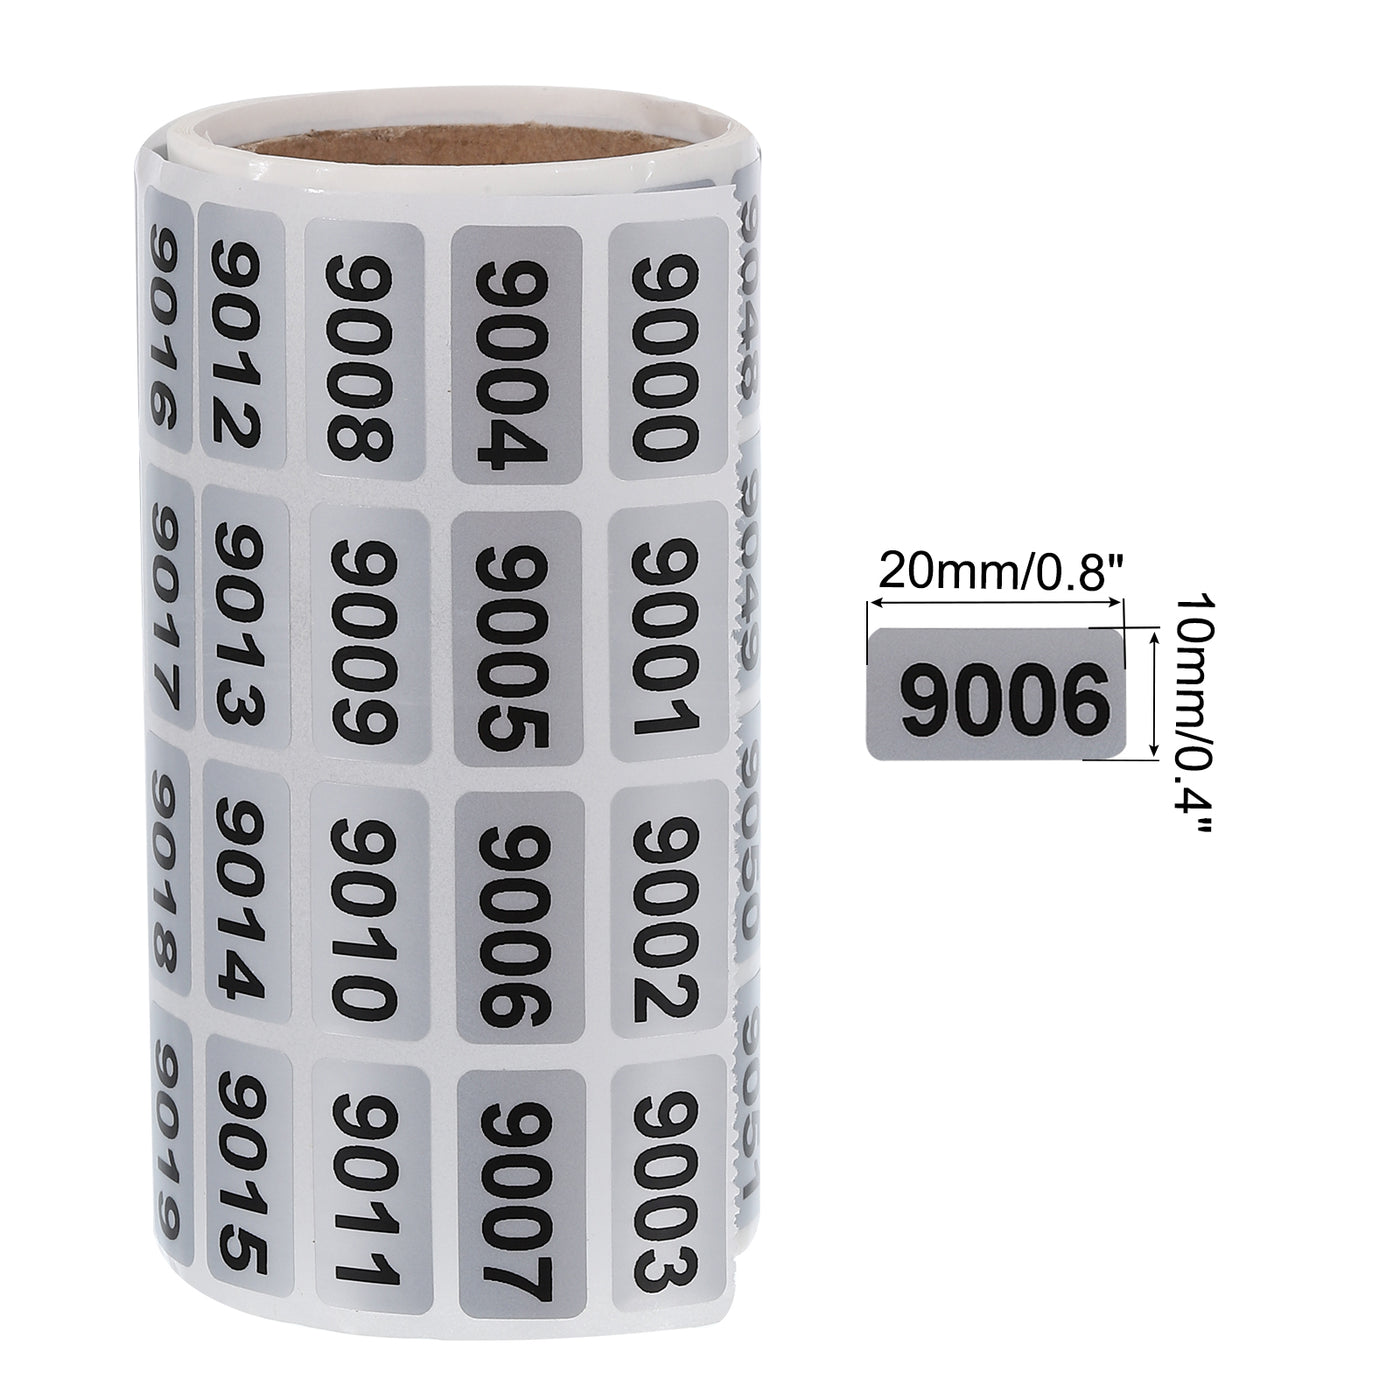 Harfington 9000 to 9999 Consecutive Number Stickers Inventory Label Black Numbers for Office Warehouse Numbering Classification, Total 2000pcs